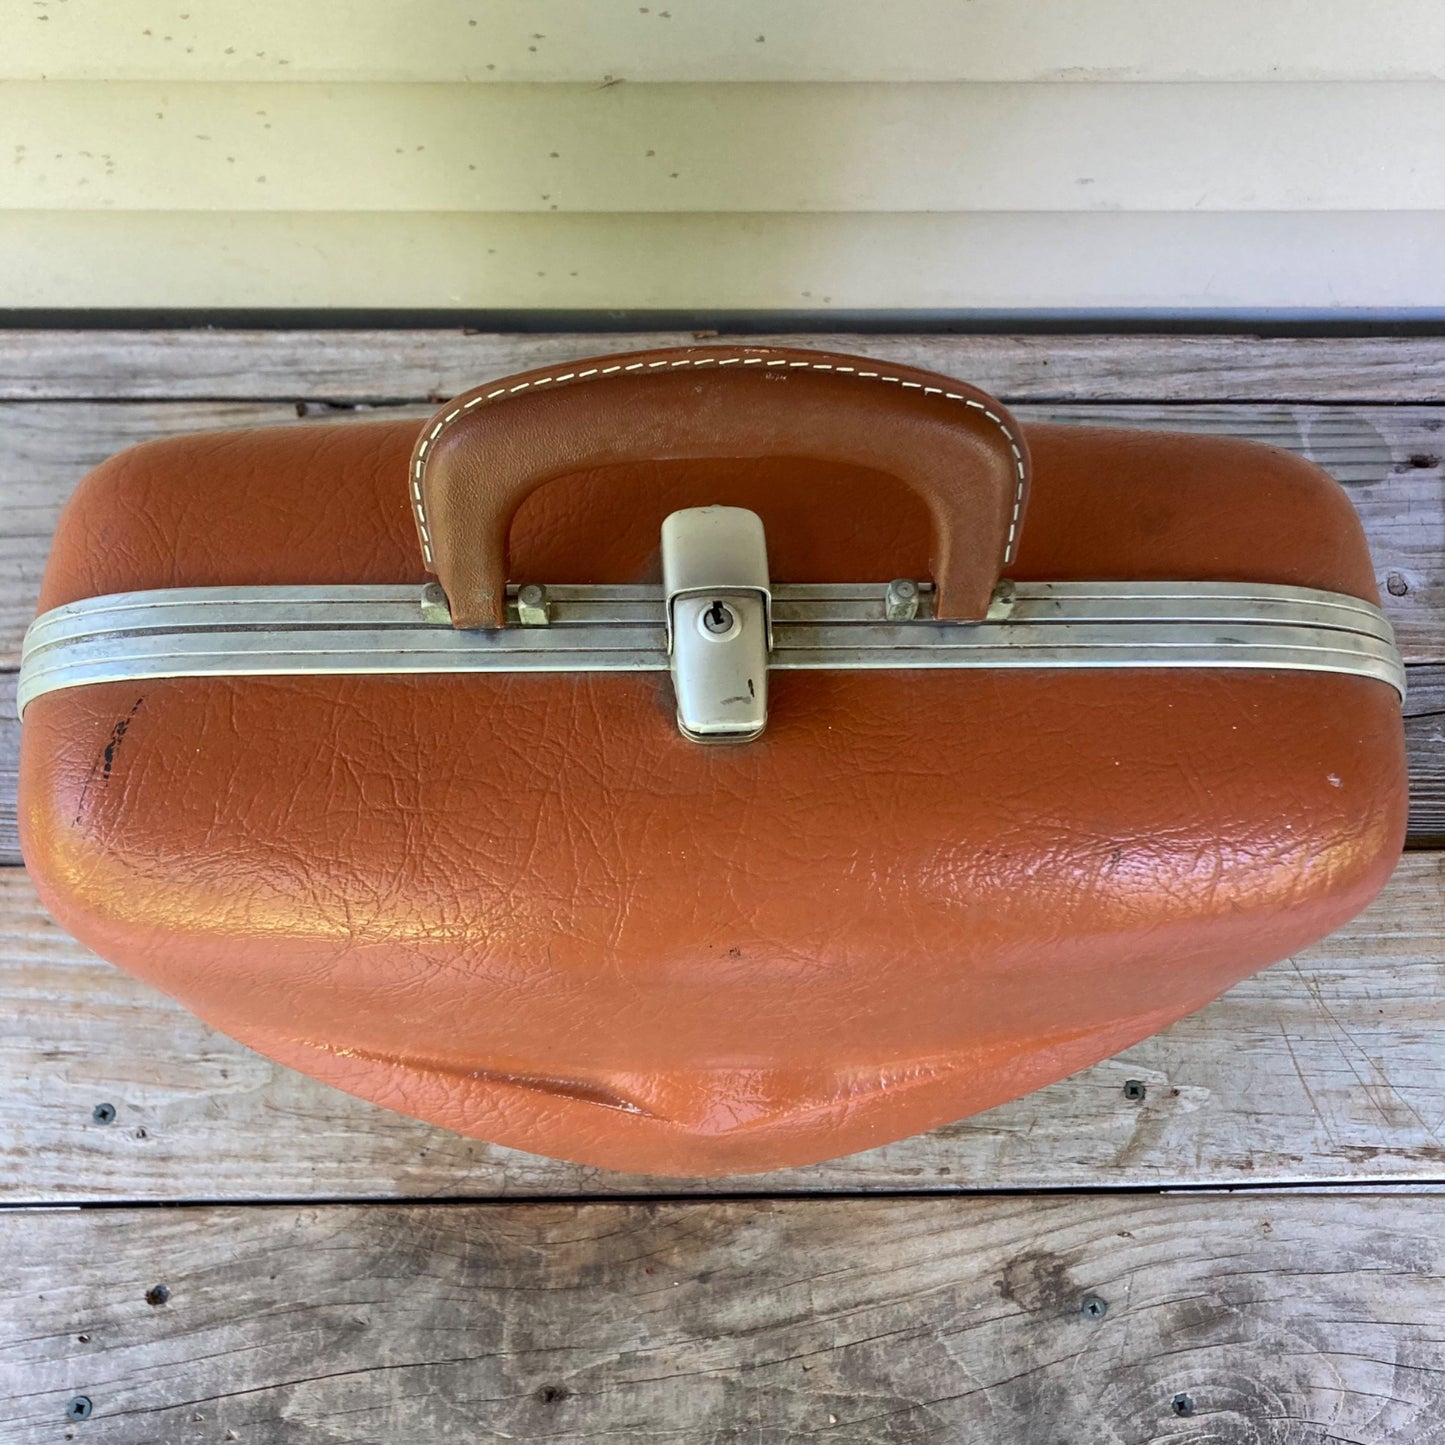 Vintage Brunswick? Bowling Ball Case Hard-Sided Clam Shell Bag Brown